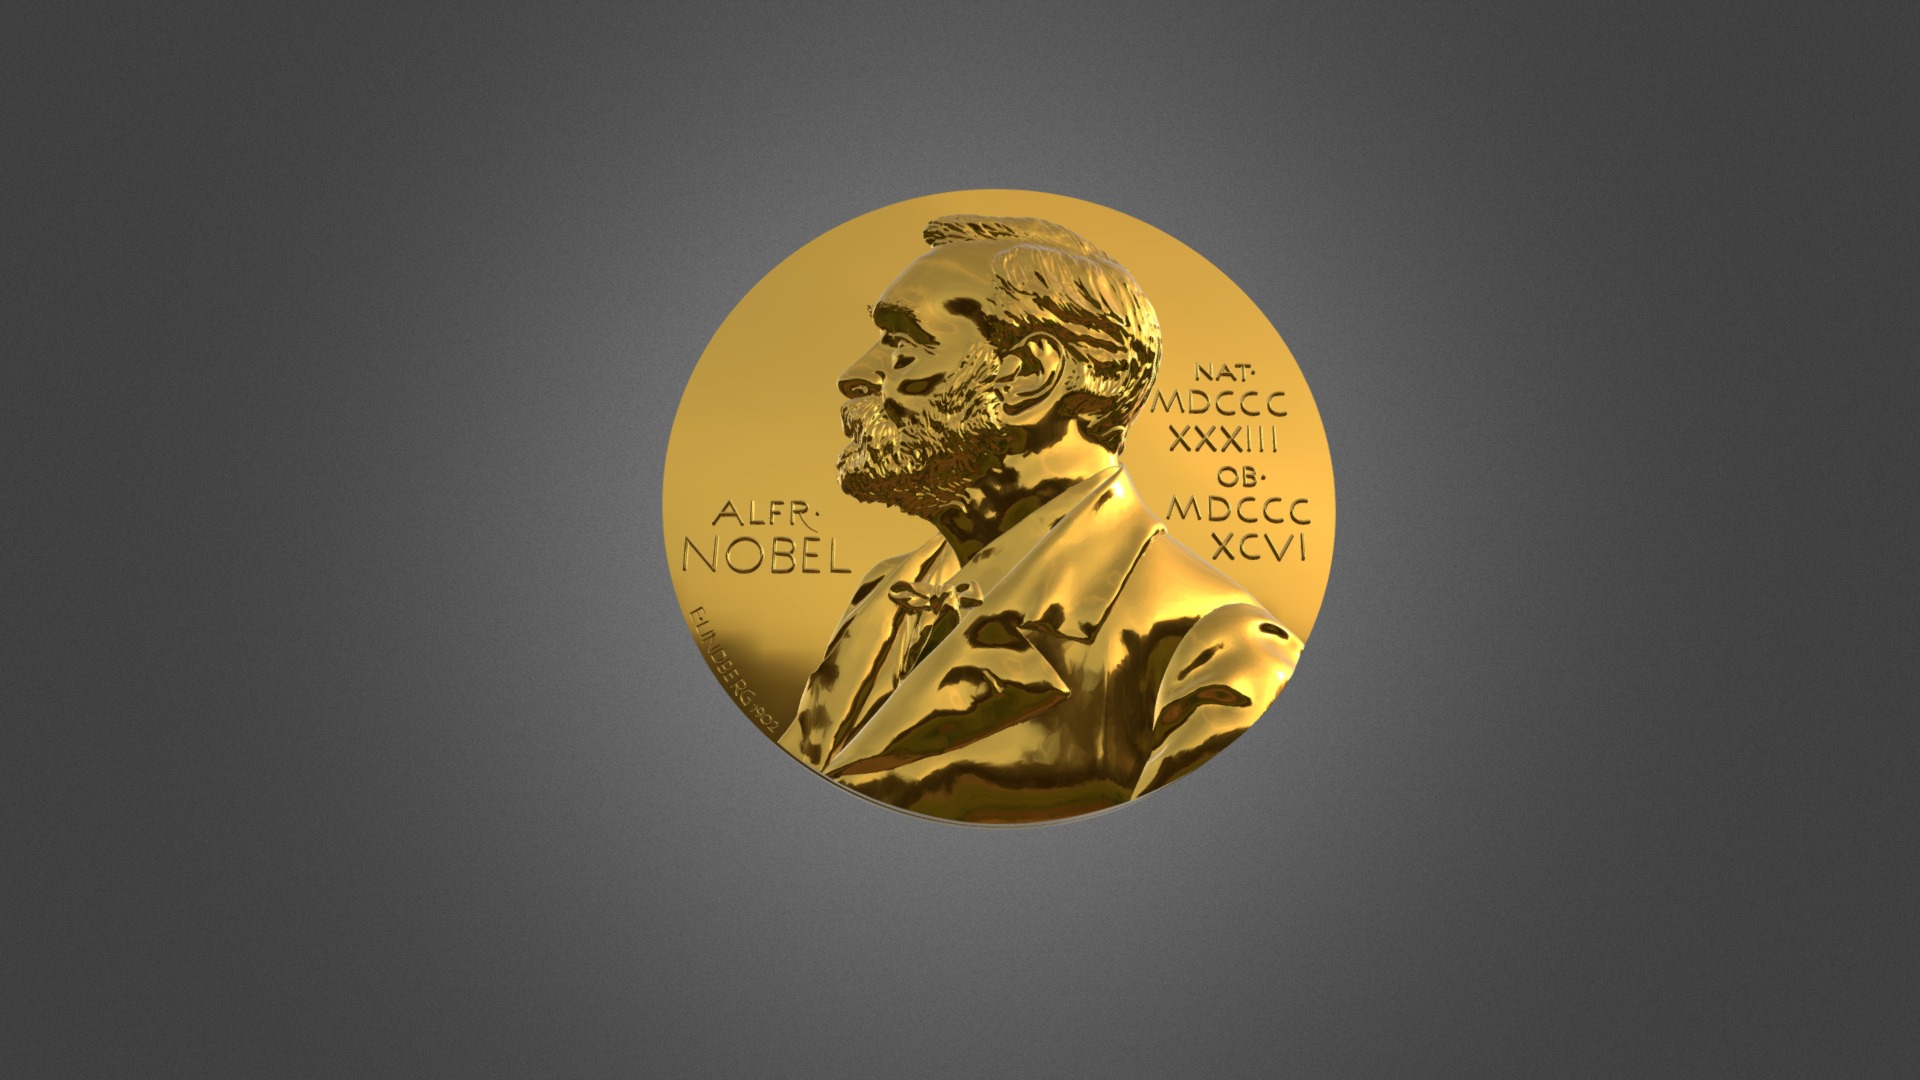 3D model Nobel Prize Replica - This is a 3D model of the Nobel Prize Replica. The 3D model is about a gold coin with a lion on it.